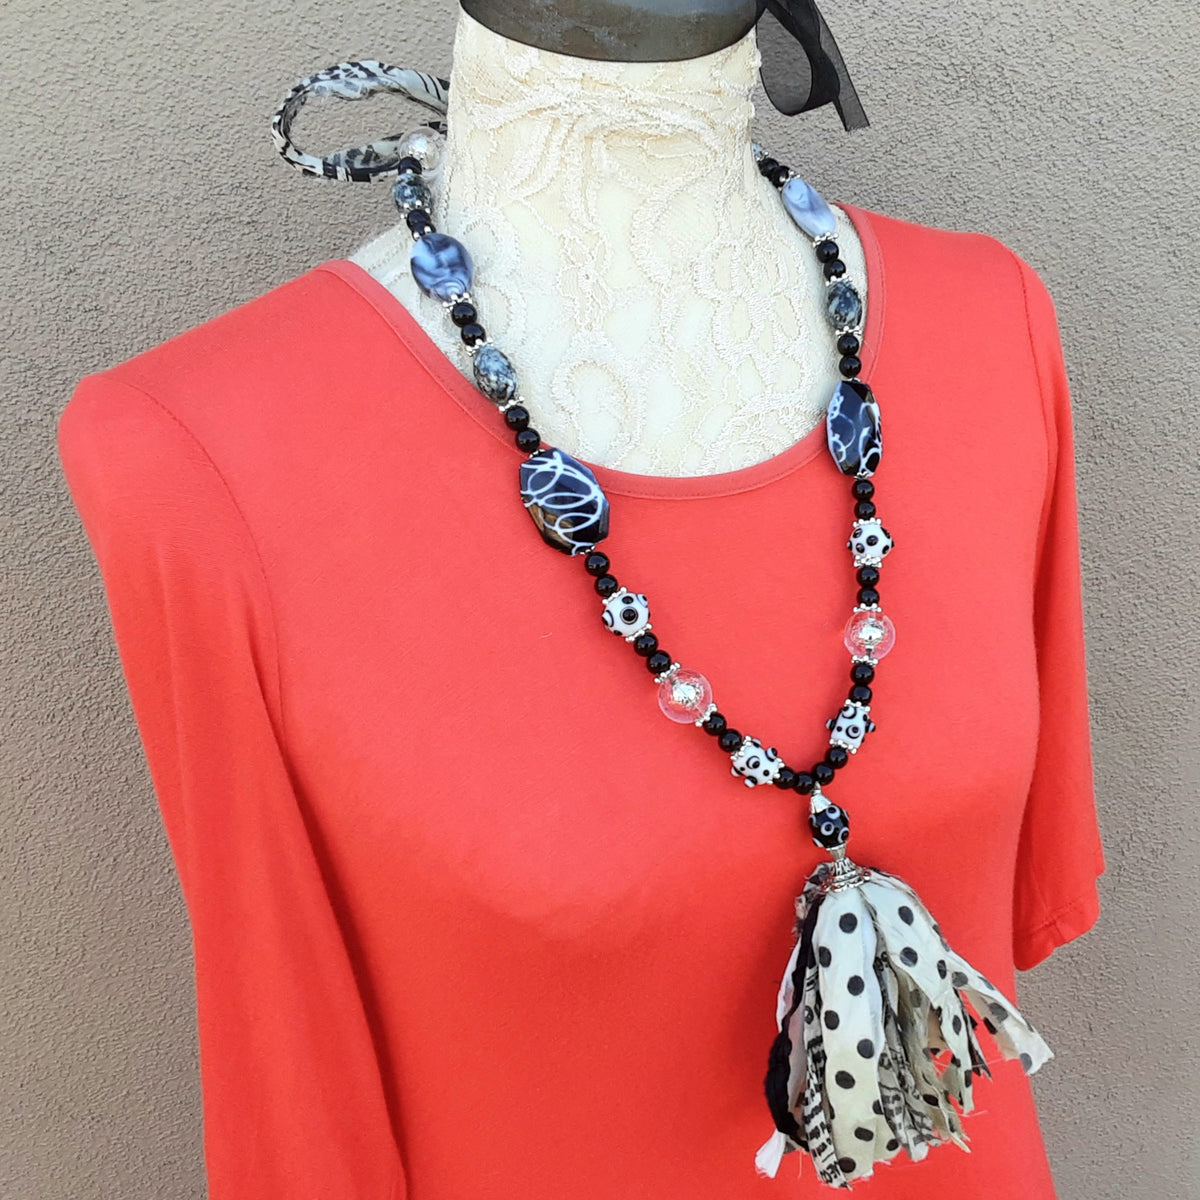 Boho Black & White Sari Tassel Statement Necklace - Beads and Fabric Holiday Gift for Her